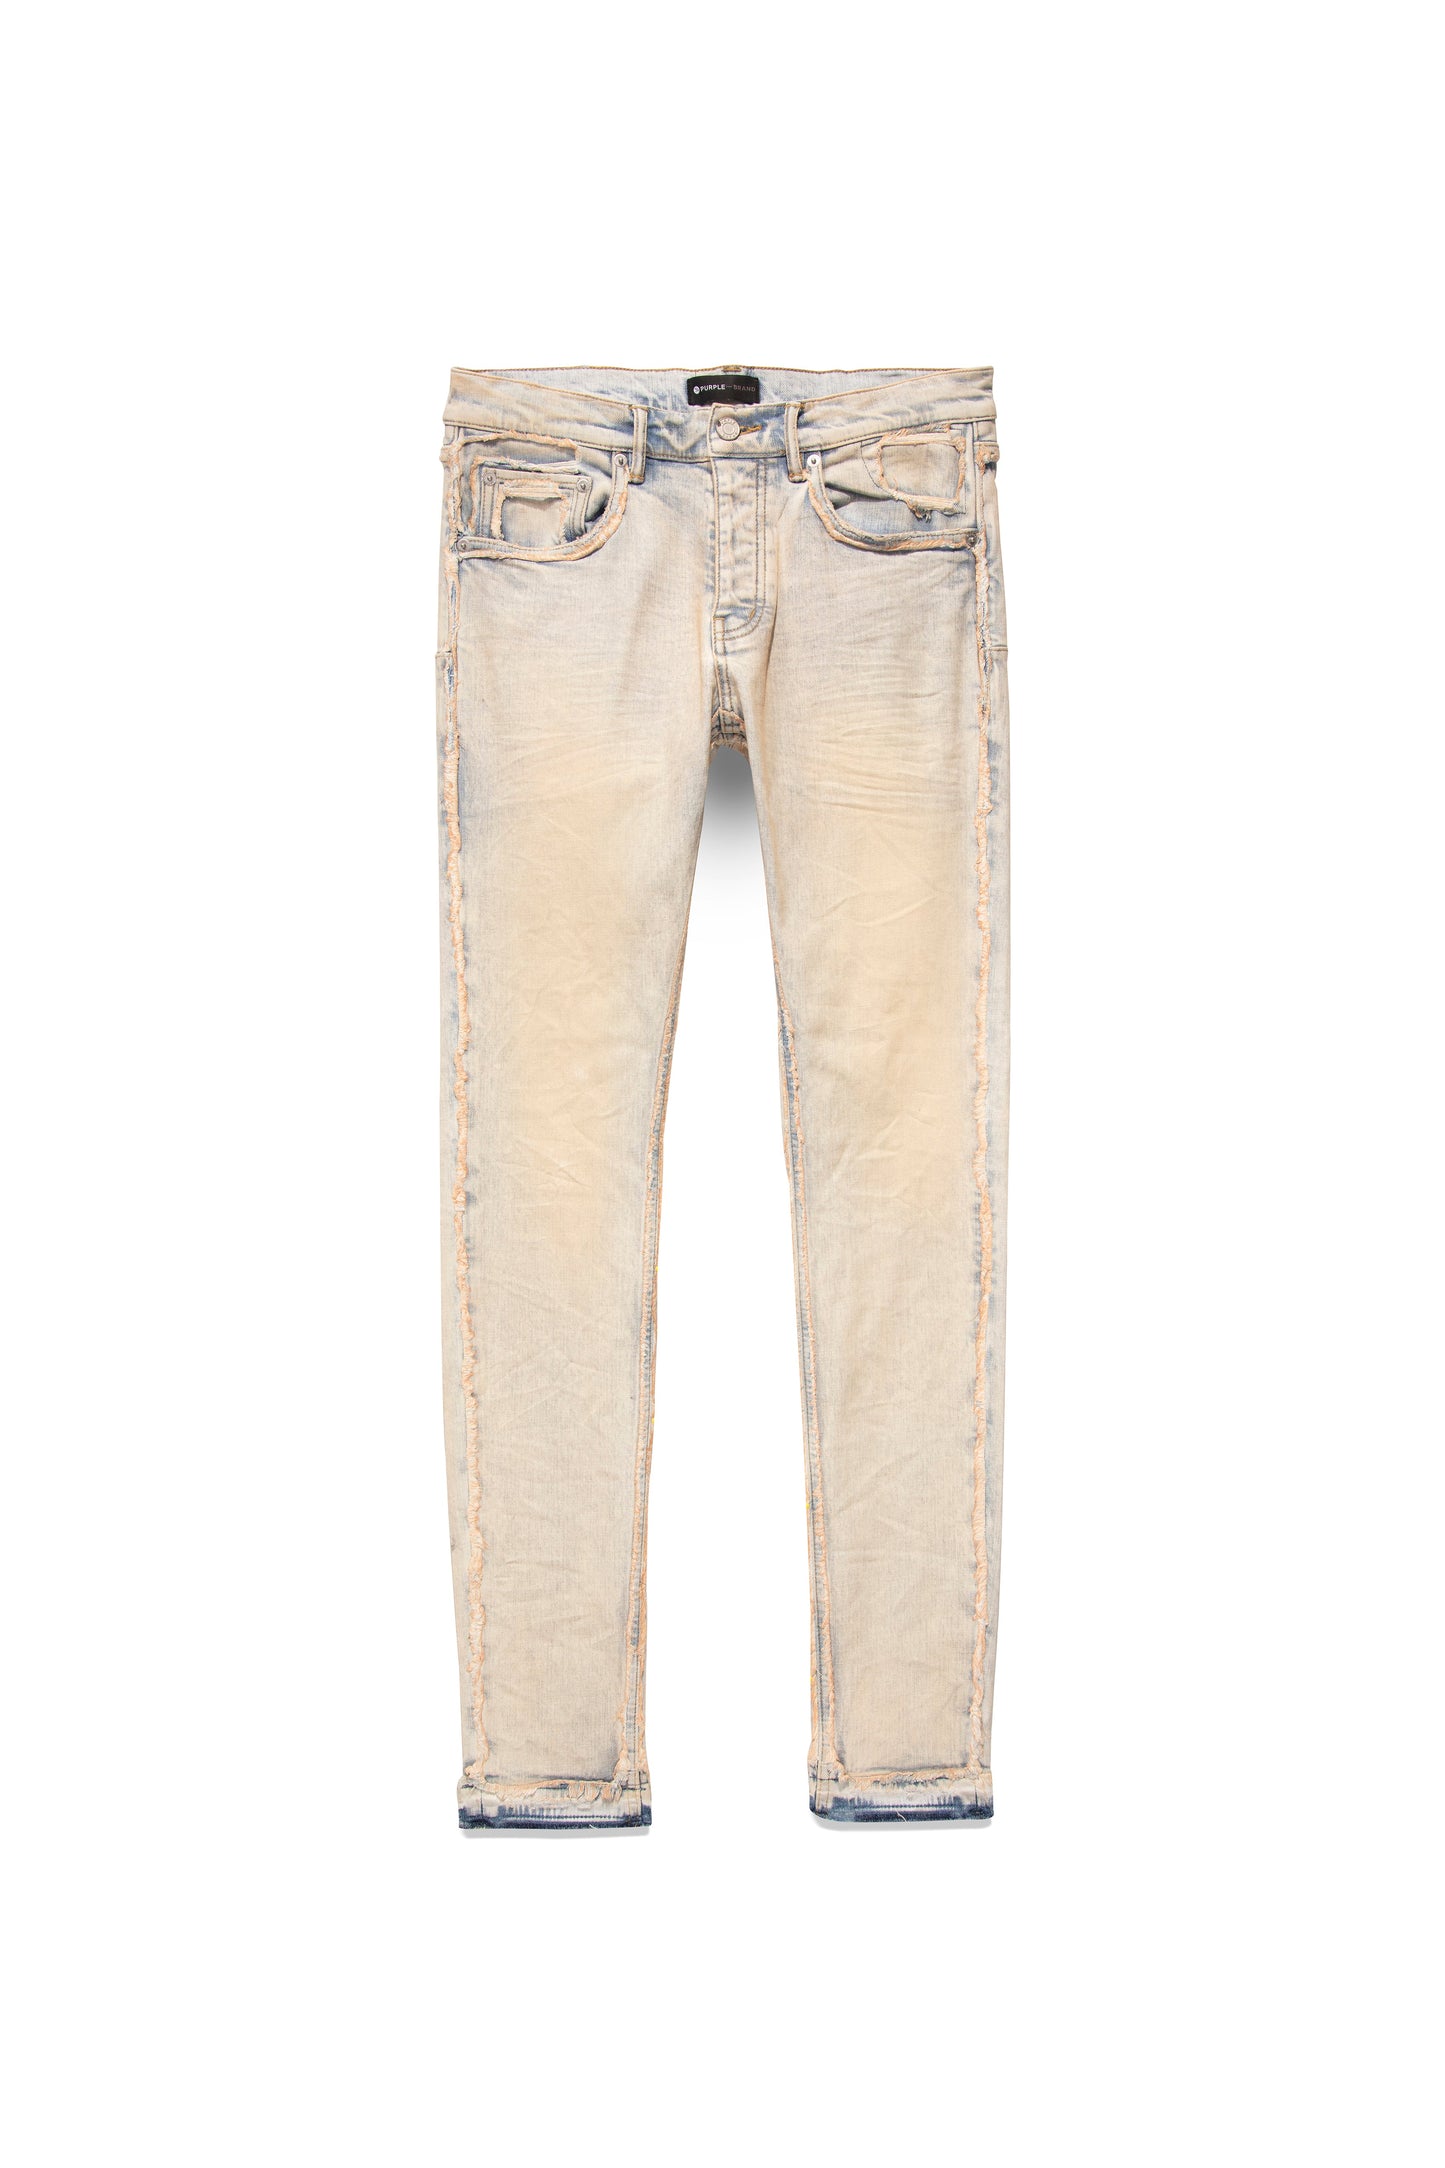 P001 LOW RISE SKINNY JEAN - Faded & Tinted Indigo Fray